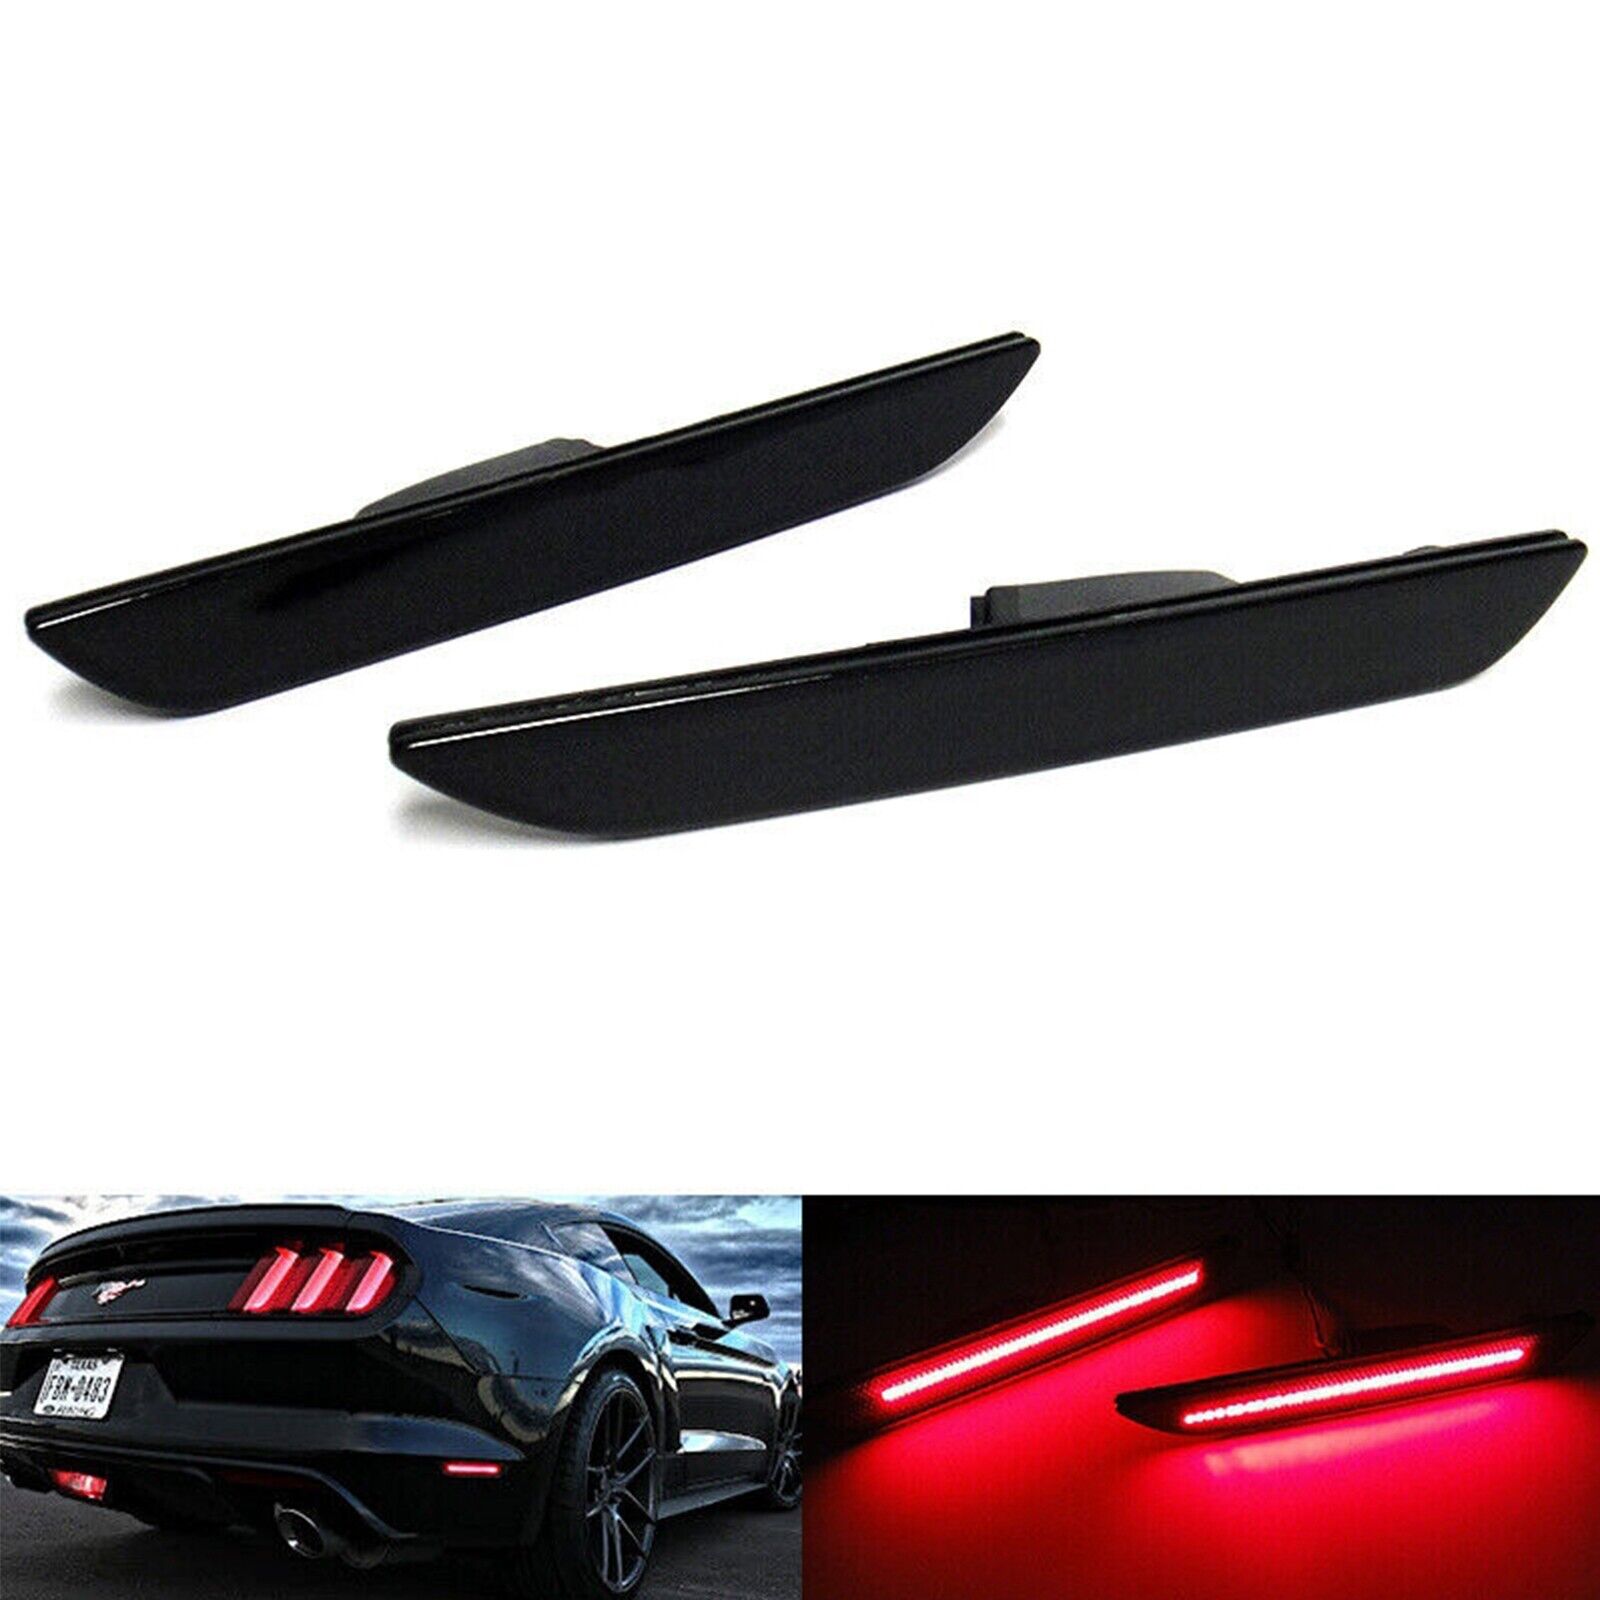 Smoked Lens LED Rear Bumper Reflector Side Marker Lights For 15-20 Ford Mustang